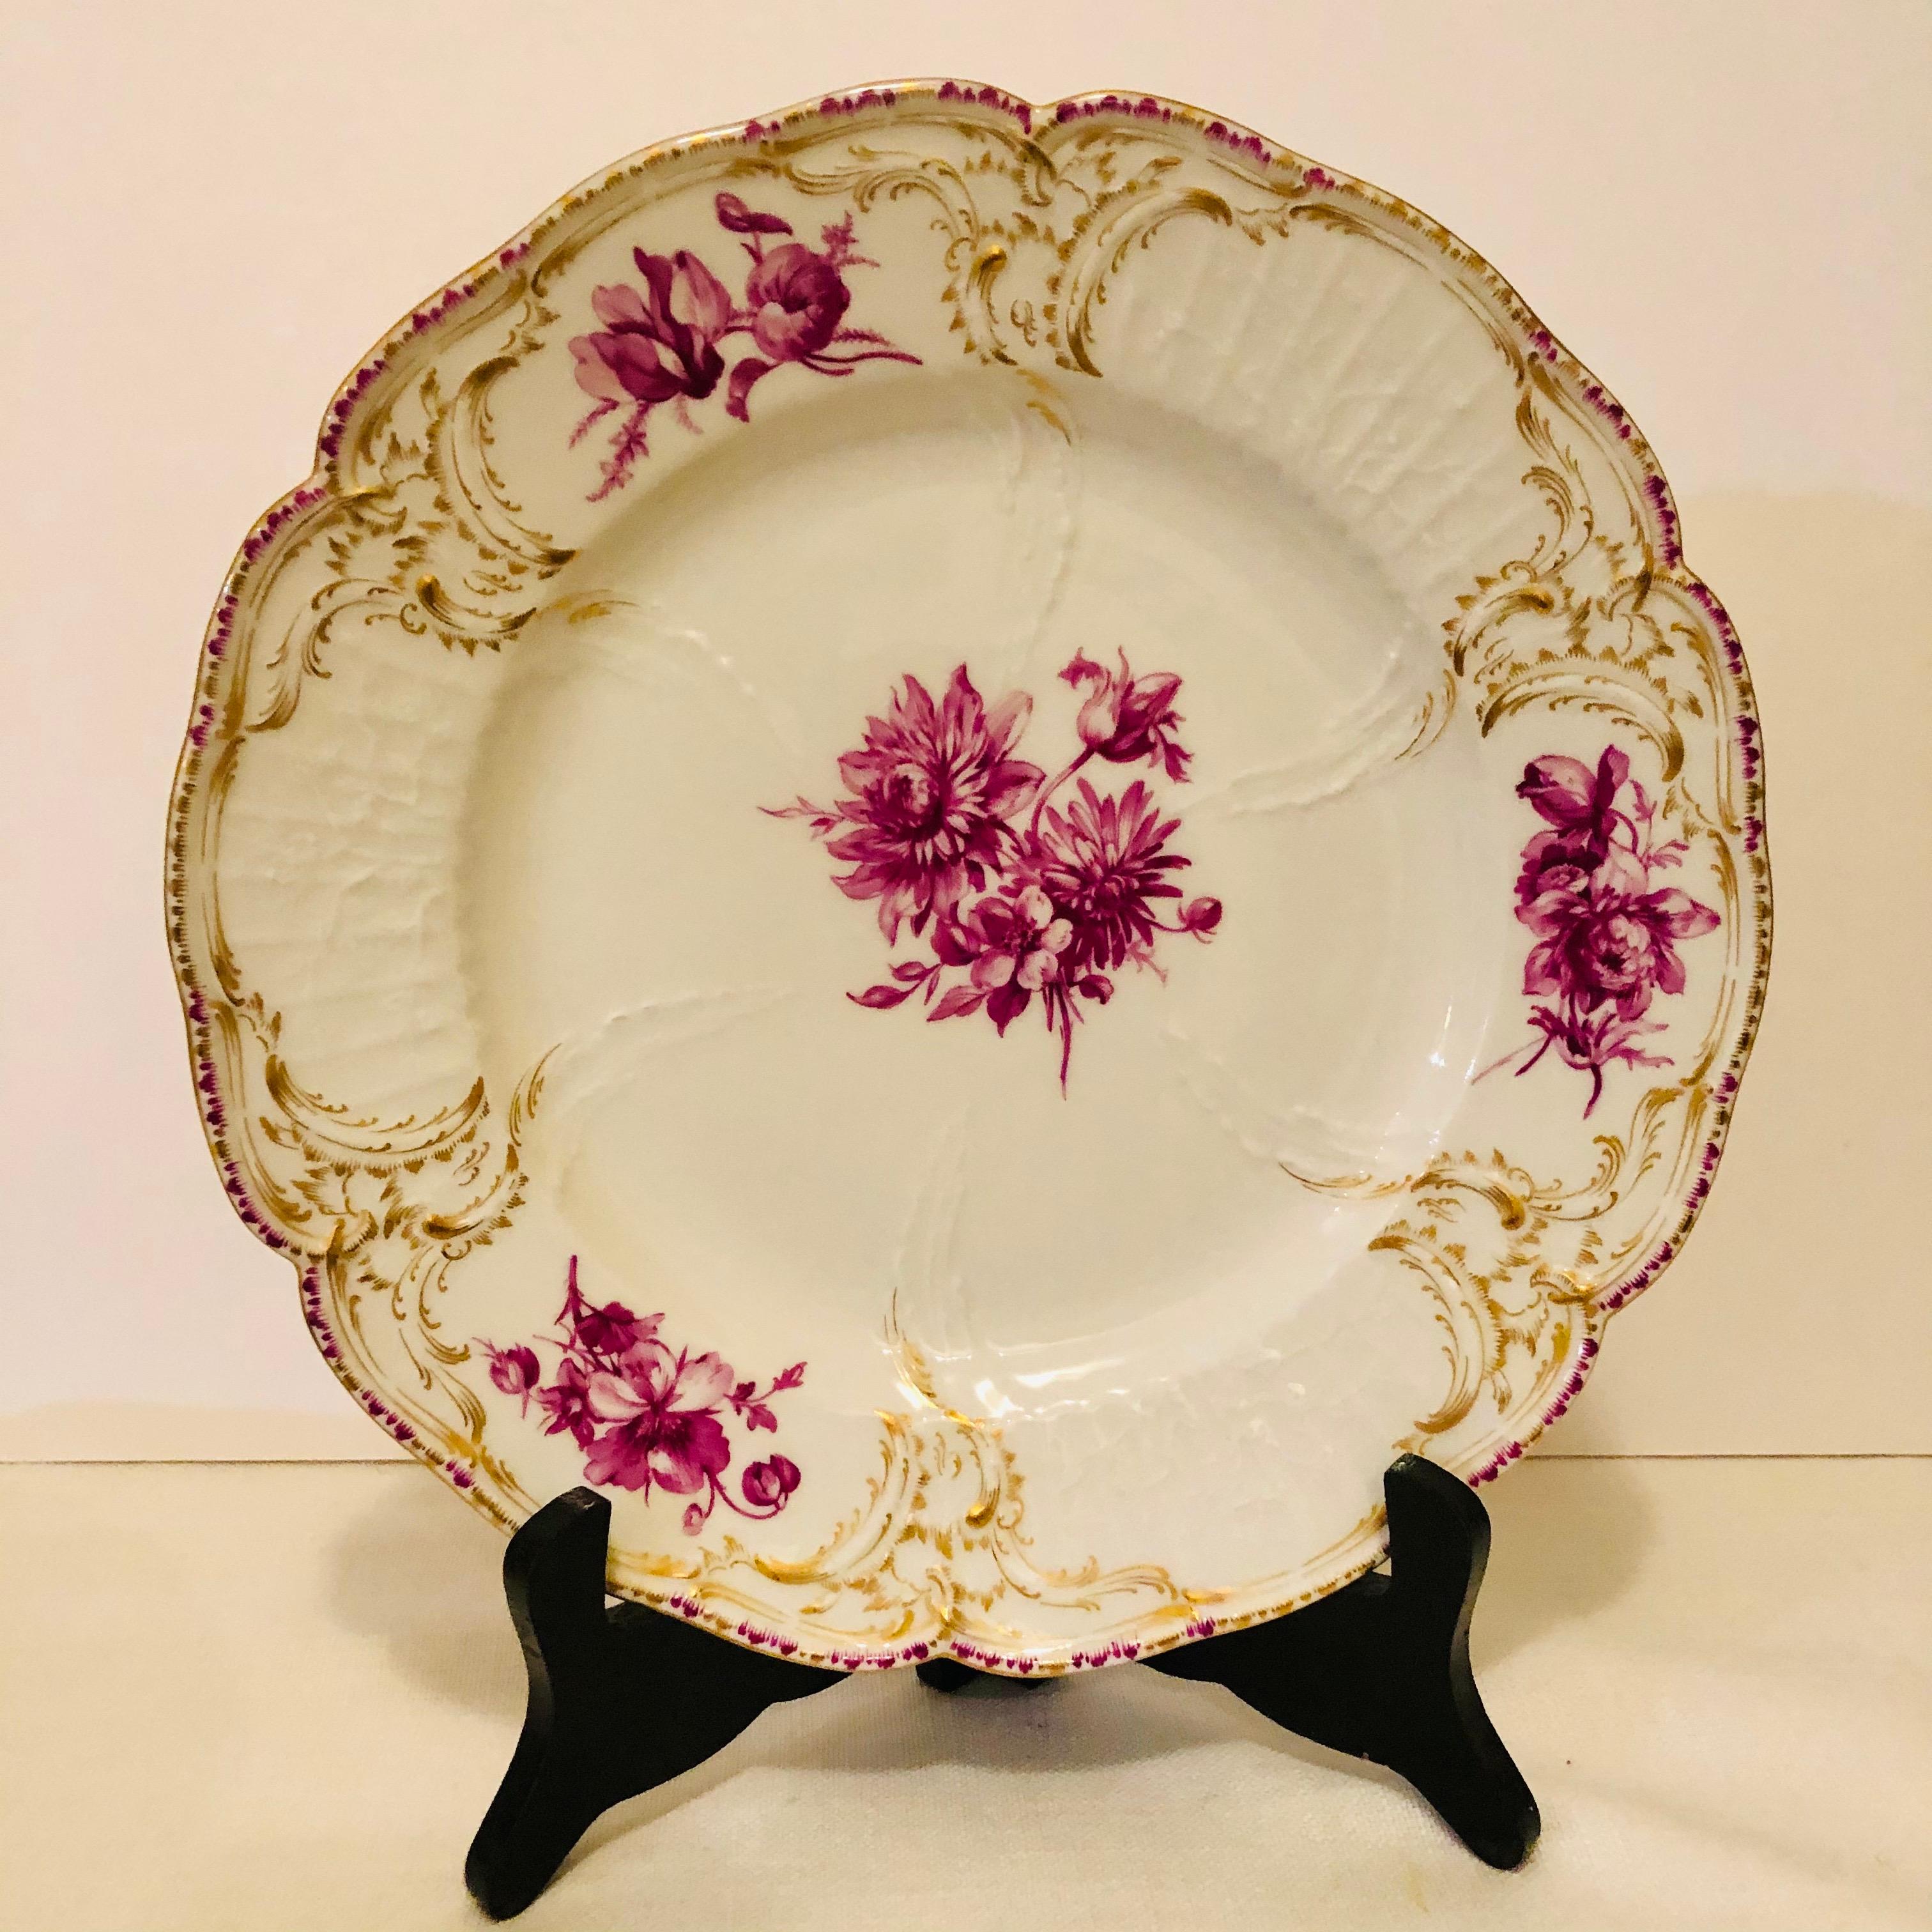 Twelve KPM Dinner Plates Each Painted with a Different Puce Flower Bouquet For Sale 1